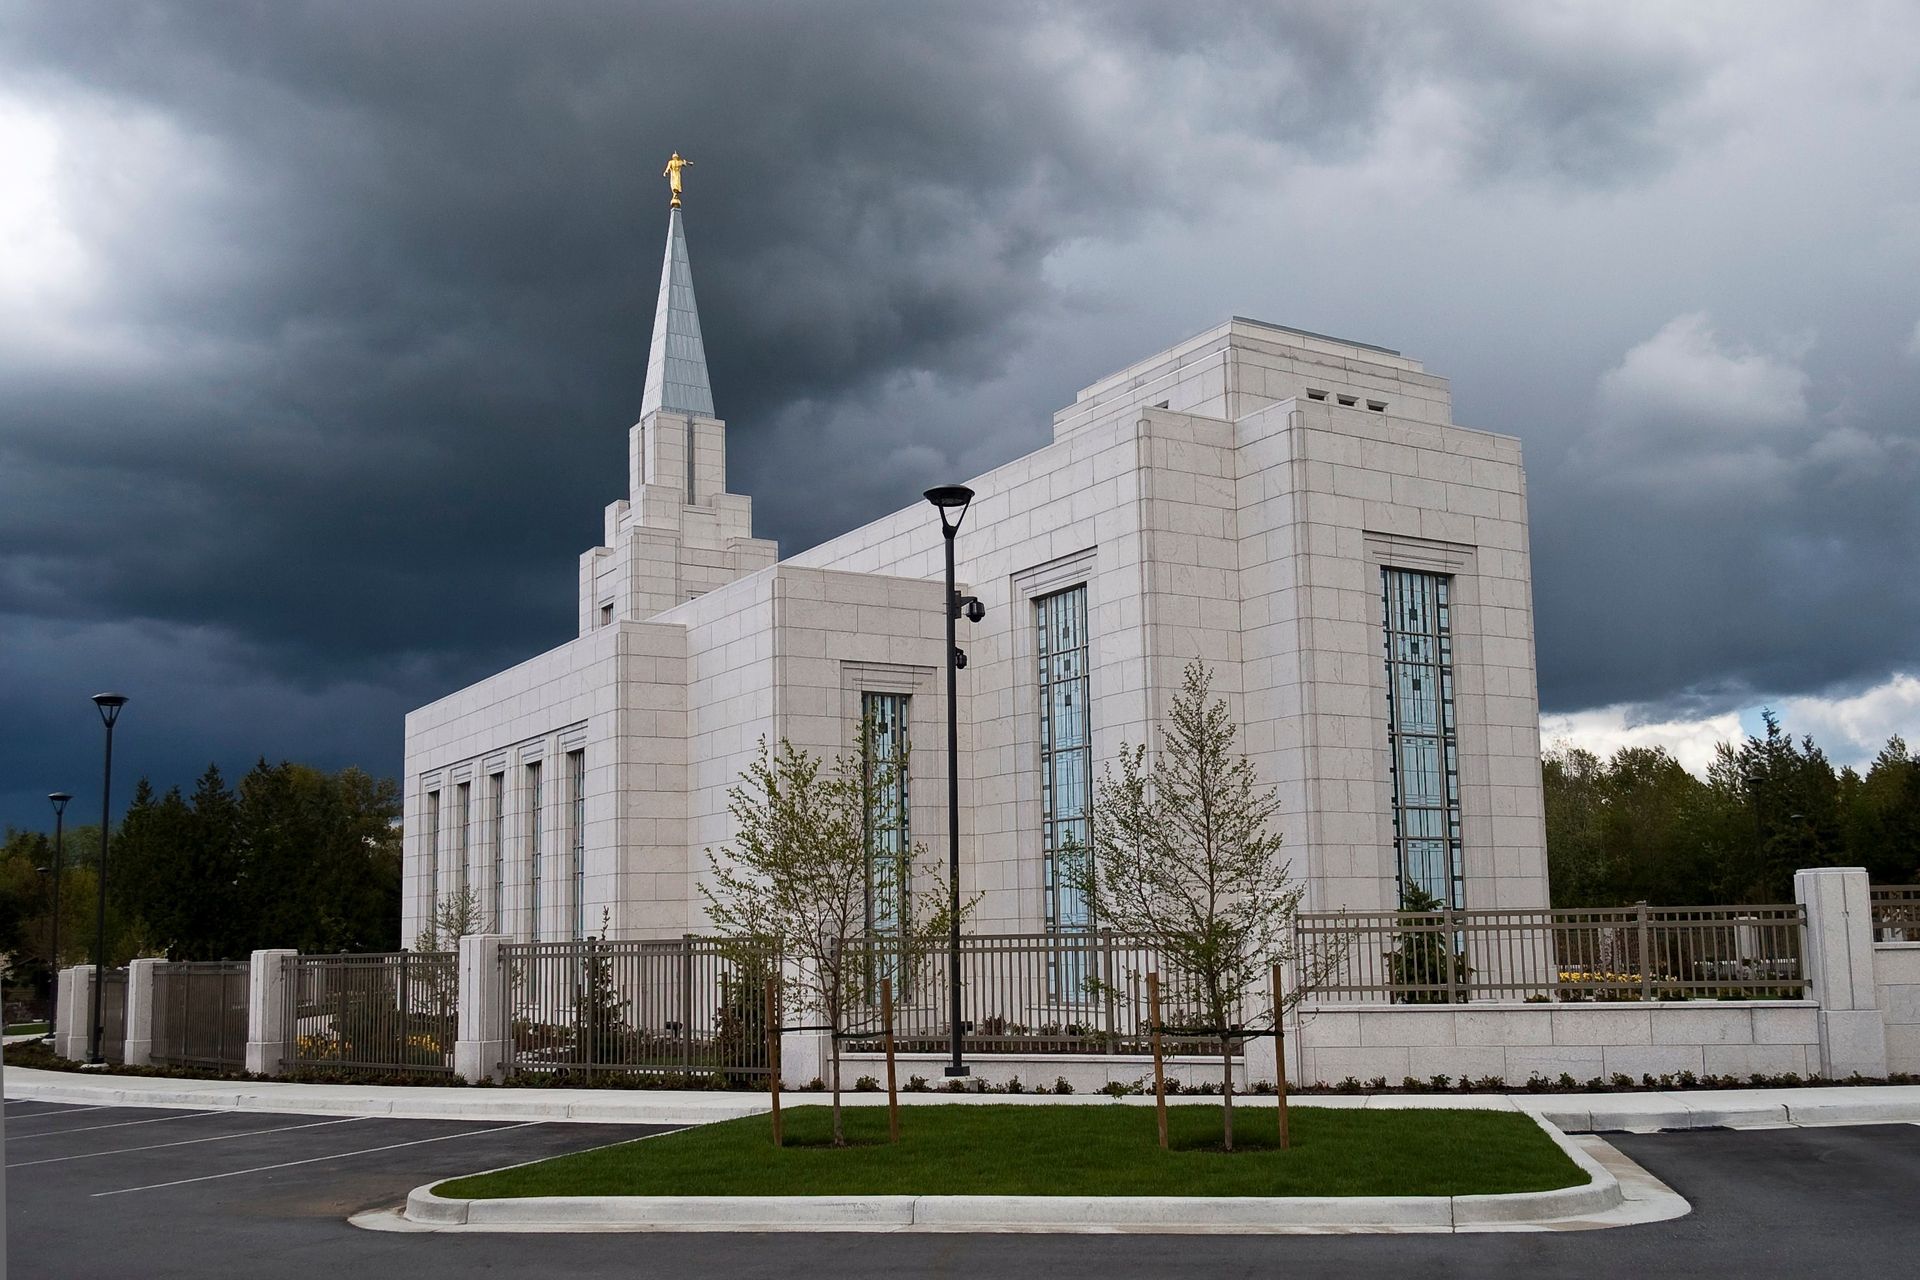 The entire Vancouver British Columbia Temple during a storm, including the windows and scenery.